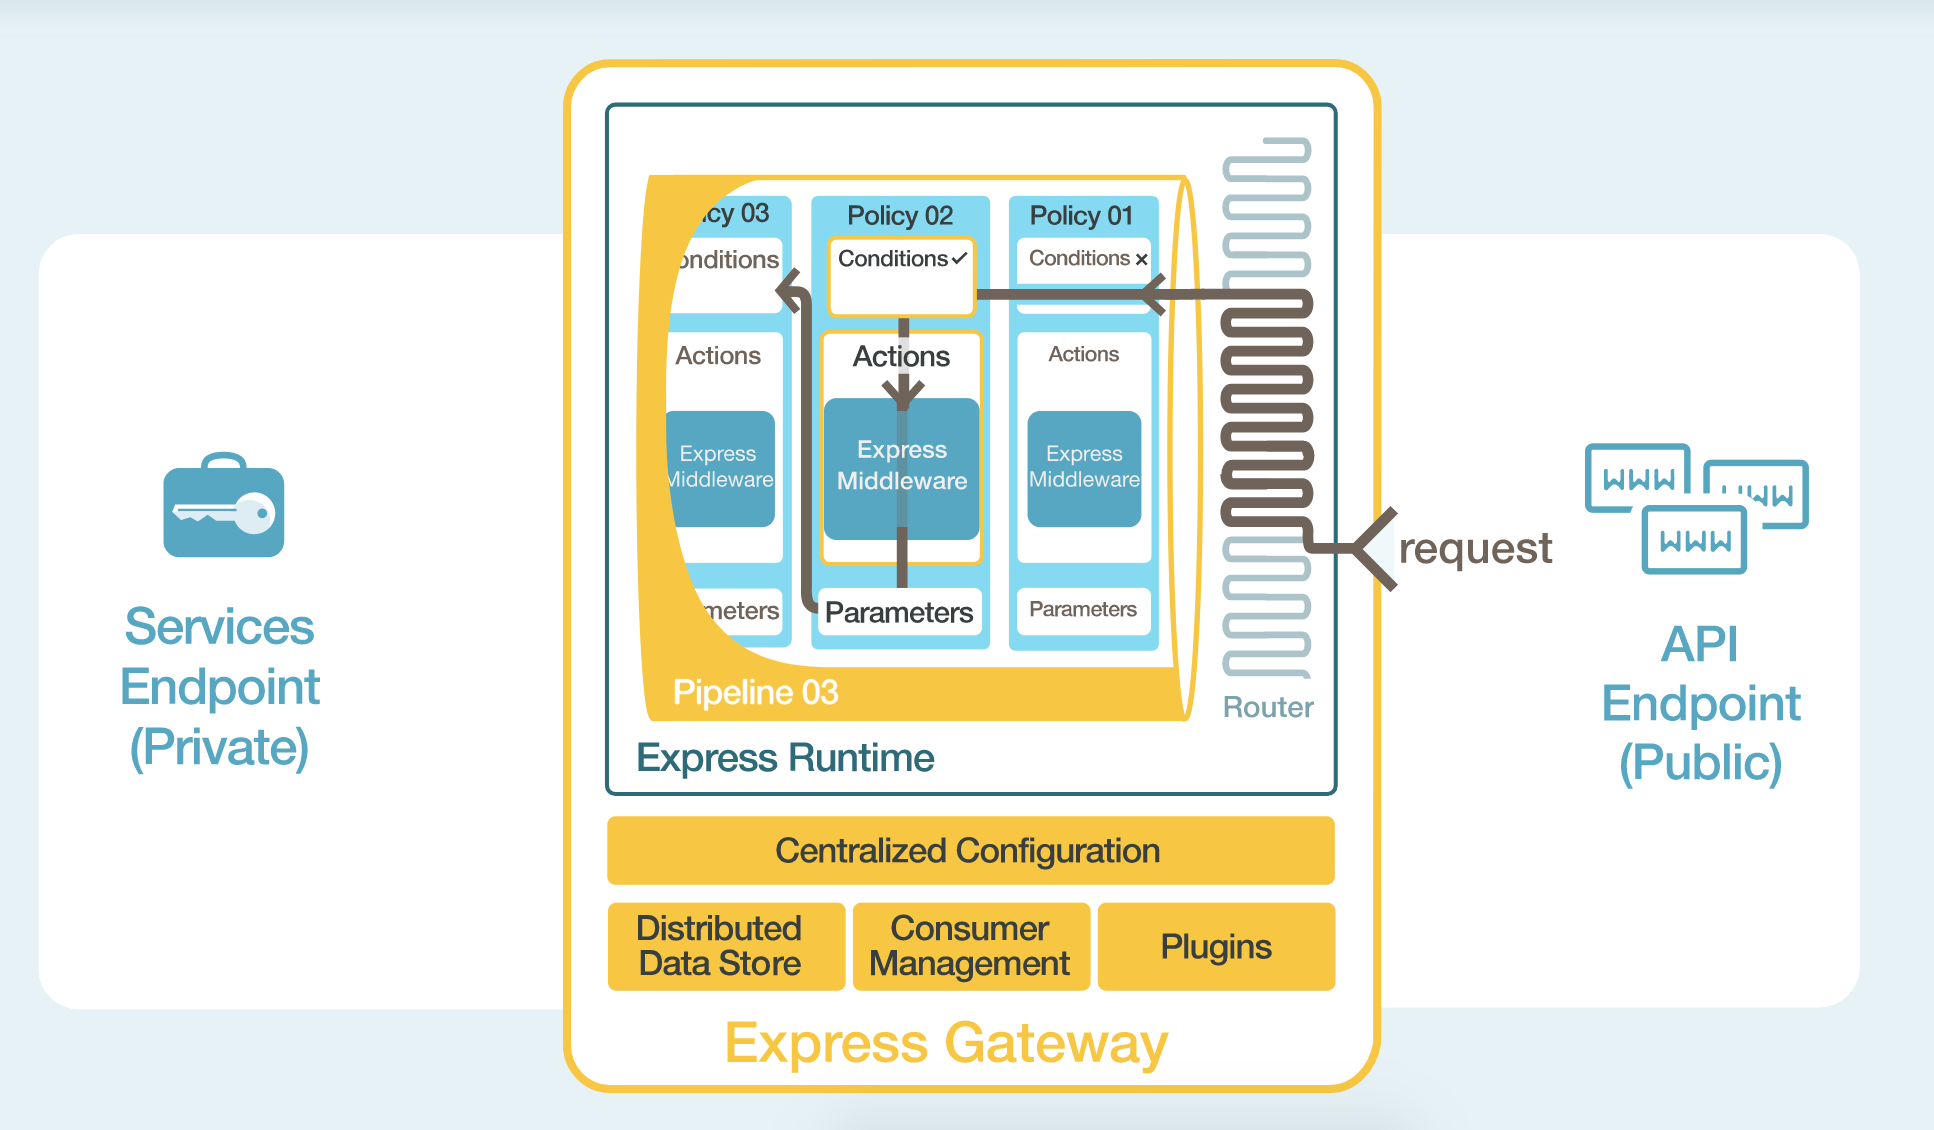 Express_Gateway_Request_routing-d23e3f.png